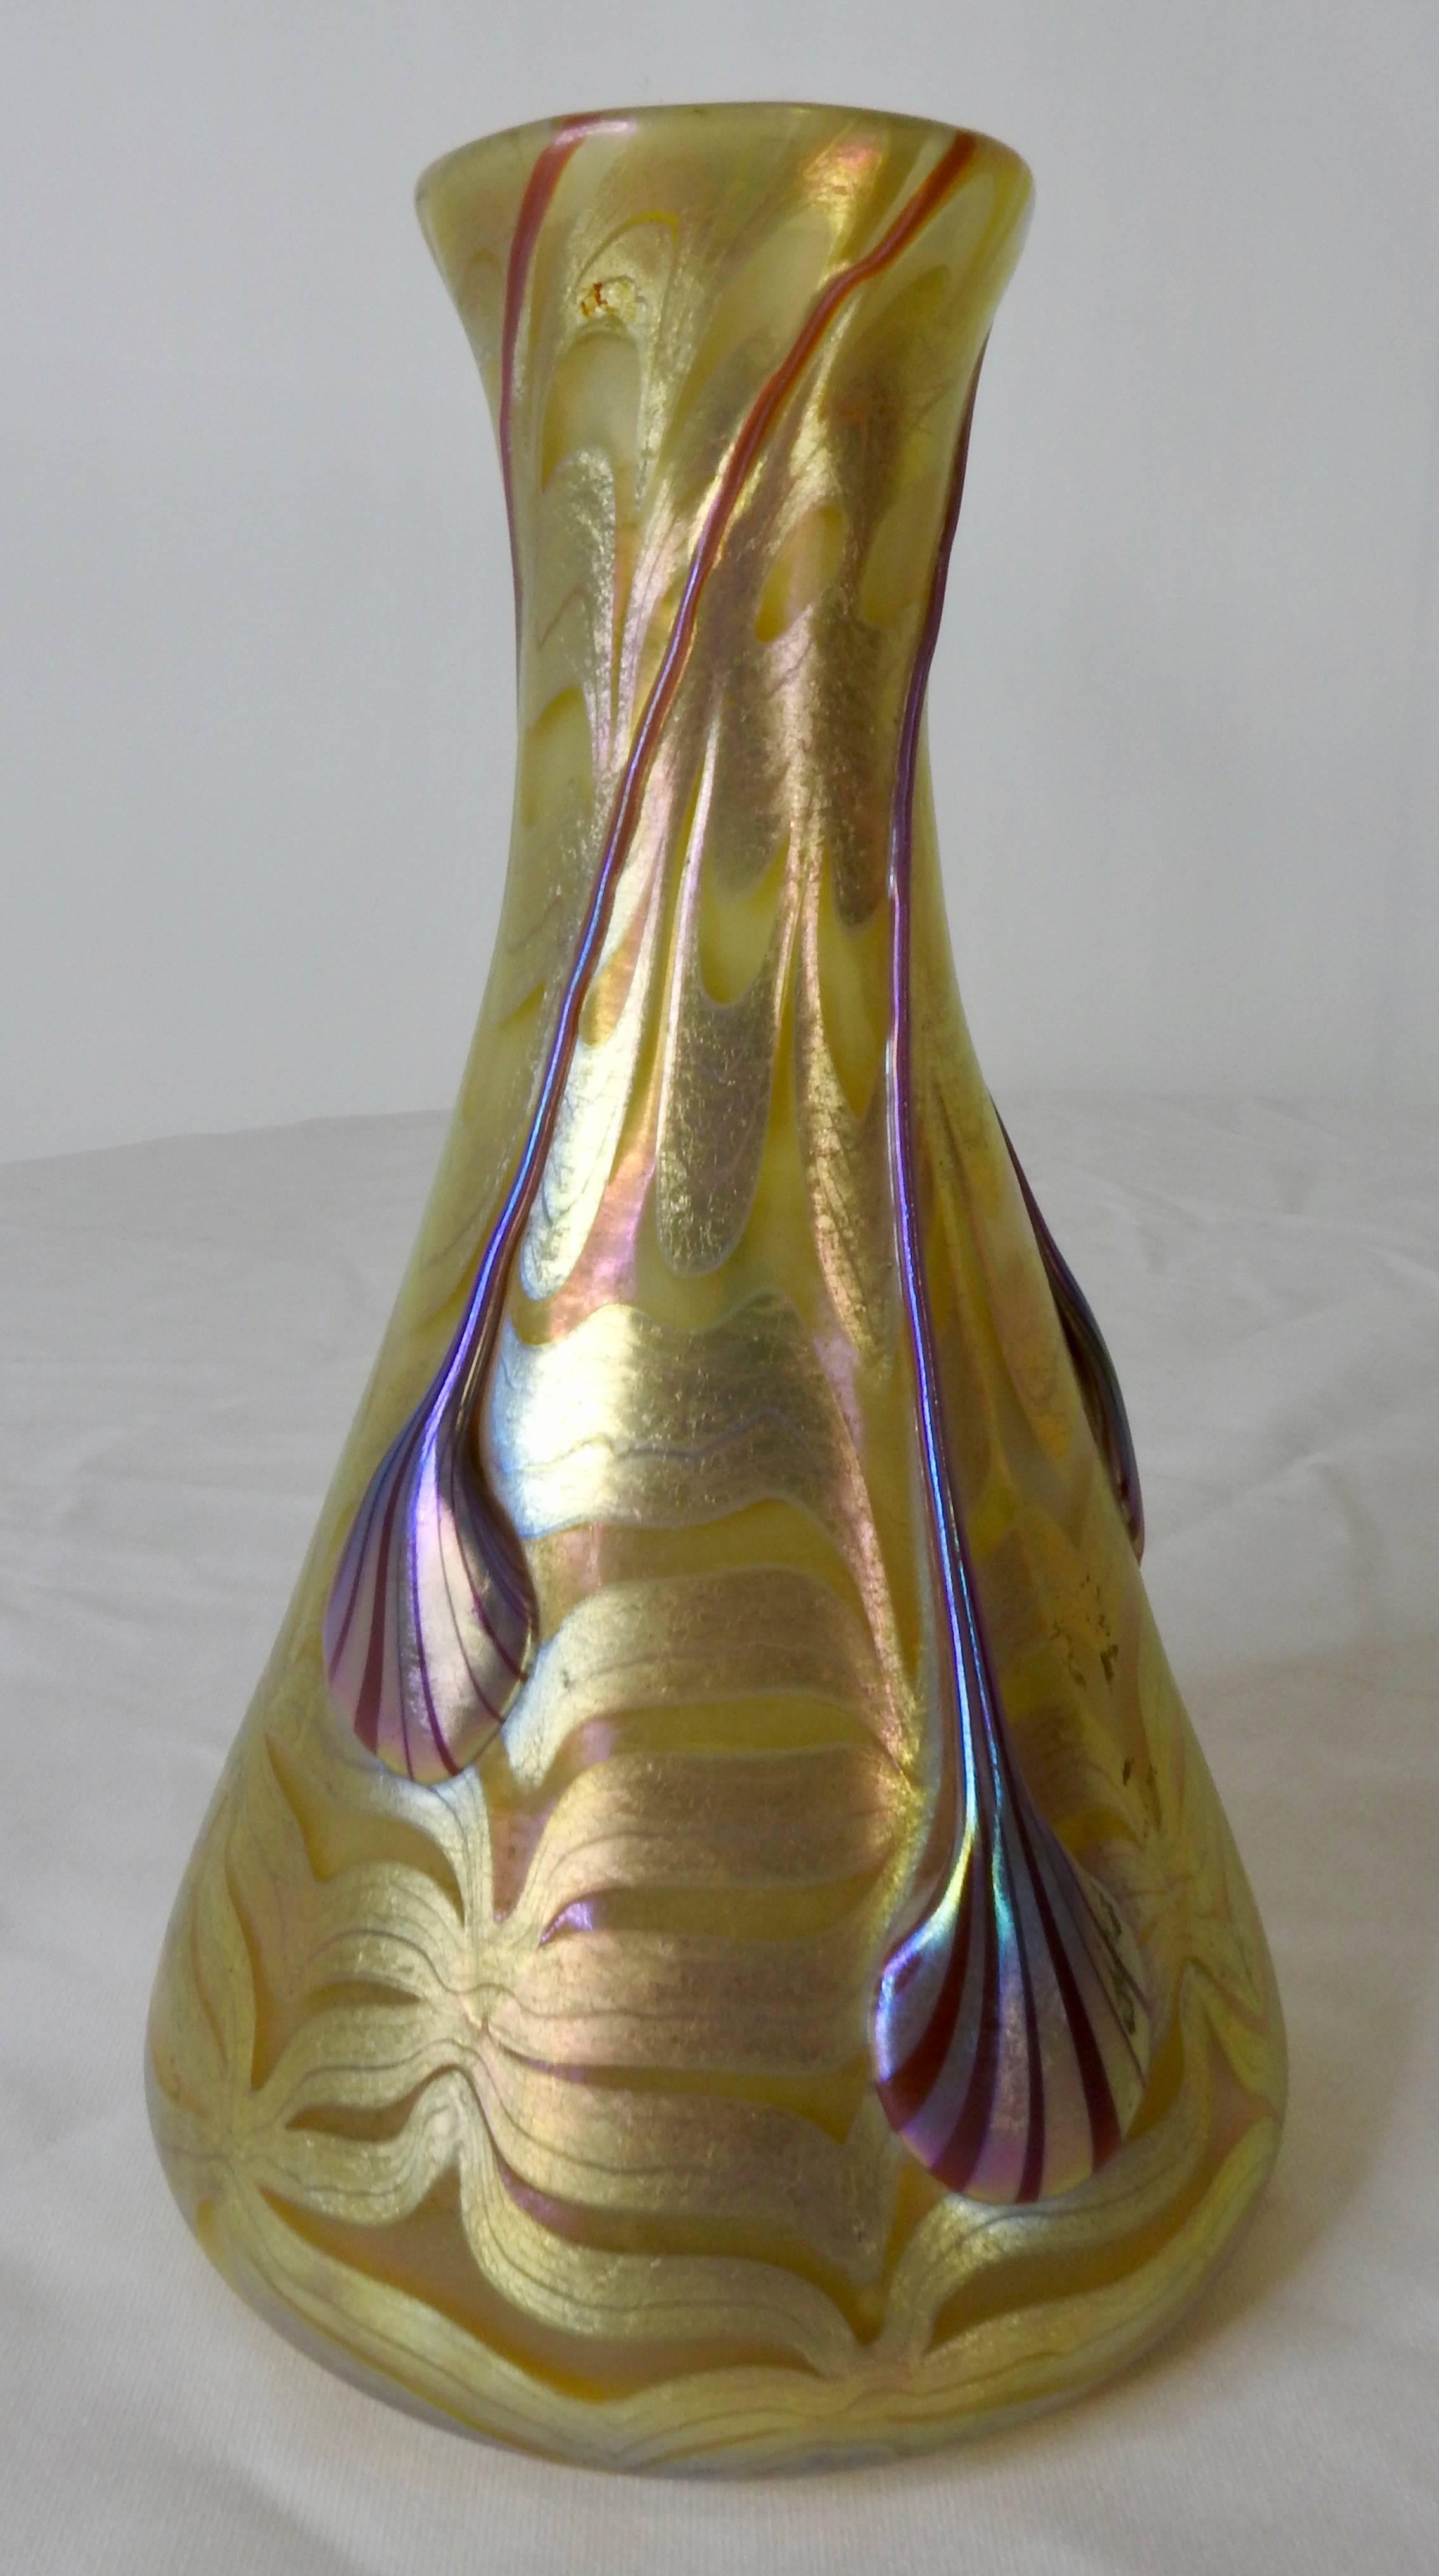 This is an outstanding Loetz Phaenomen genres vase made in Austria. The glass is opal ground and combed with silver-yellow threads. Drops of red with striped metallic extend from top to bottom and are of differing lengths. The vase is signed Loetz